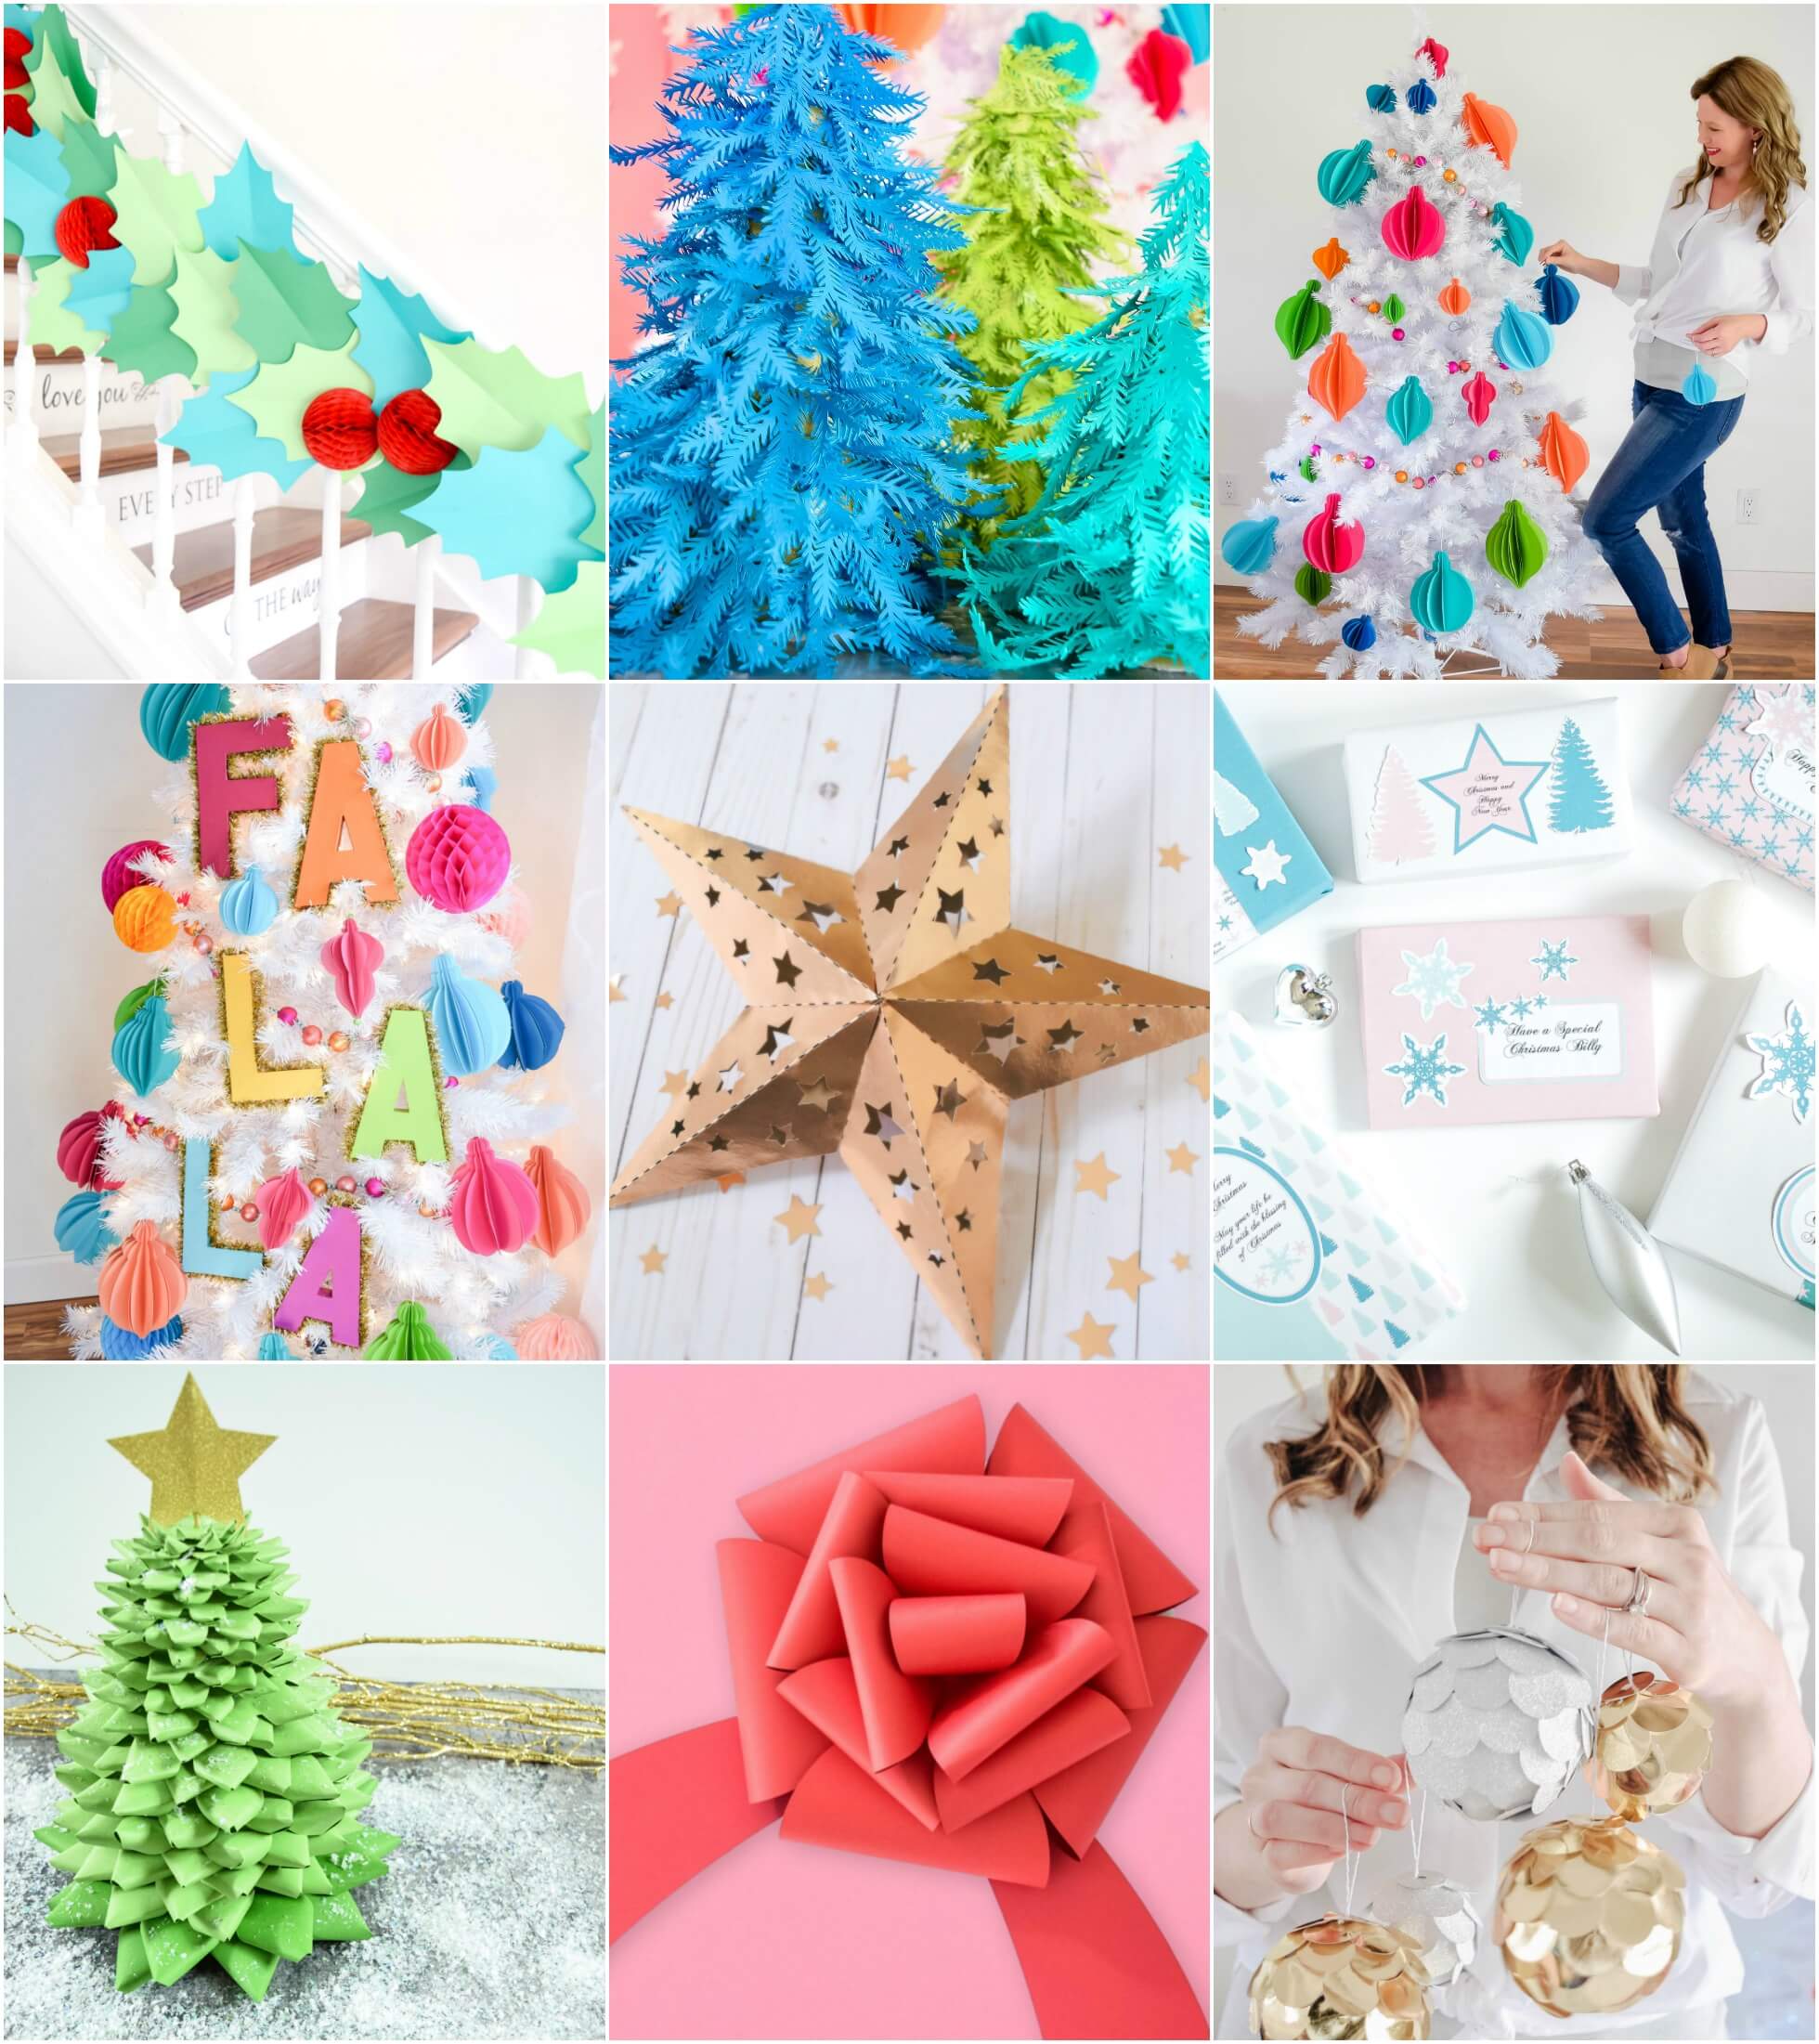 A collage of images show nine different Christmas crafts, from paper garland to decorative paper Christmas trees, bows, Christmas cards, and ornaments.